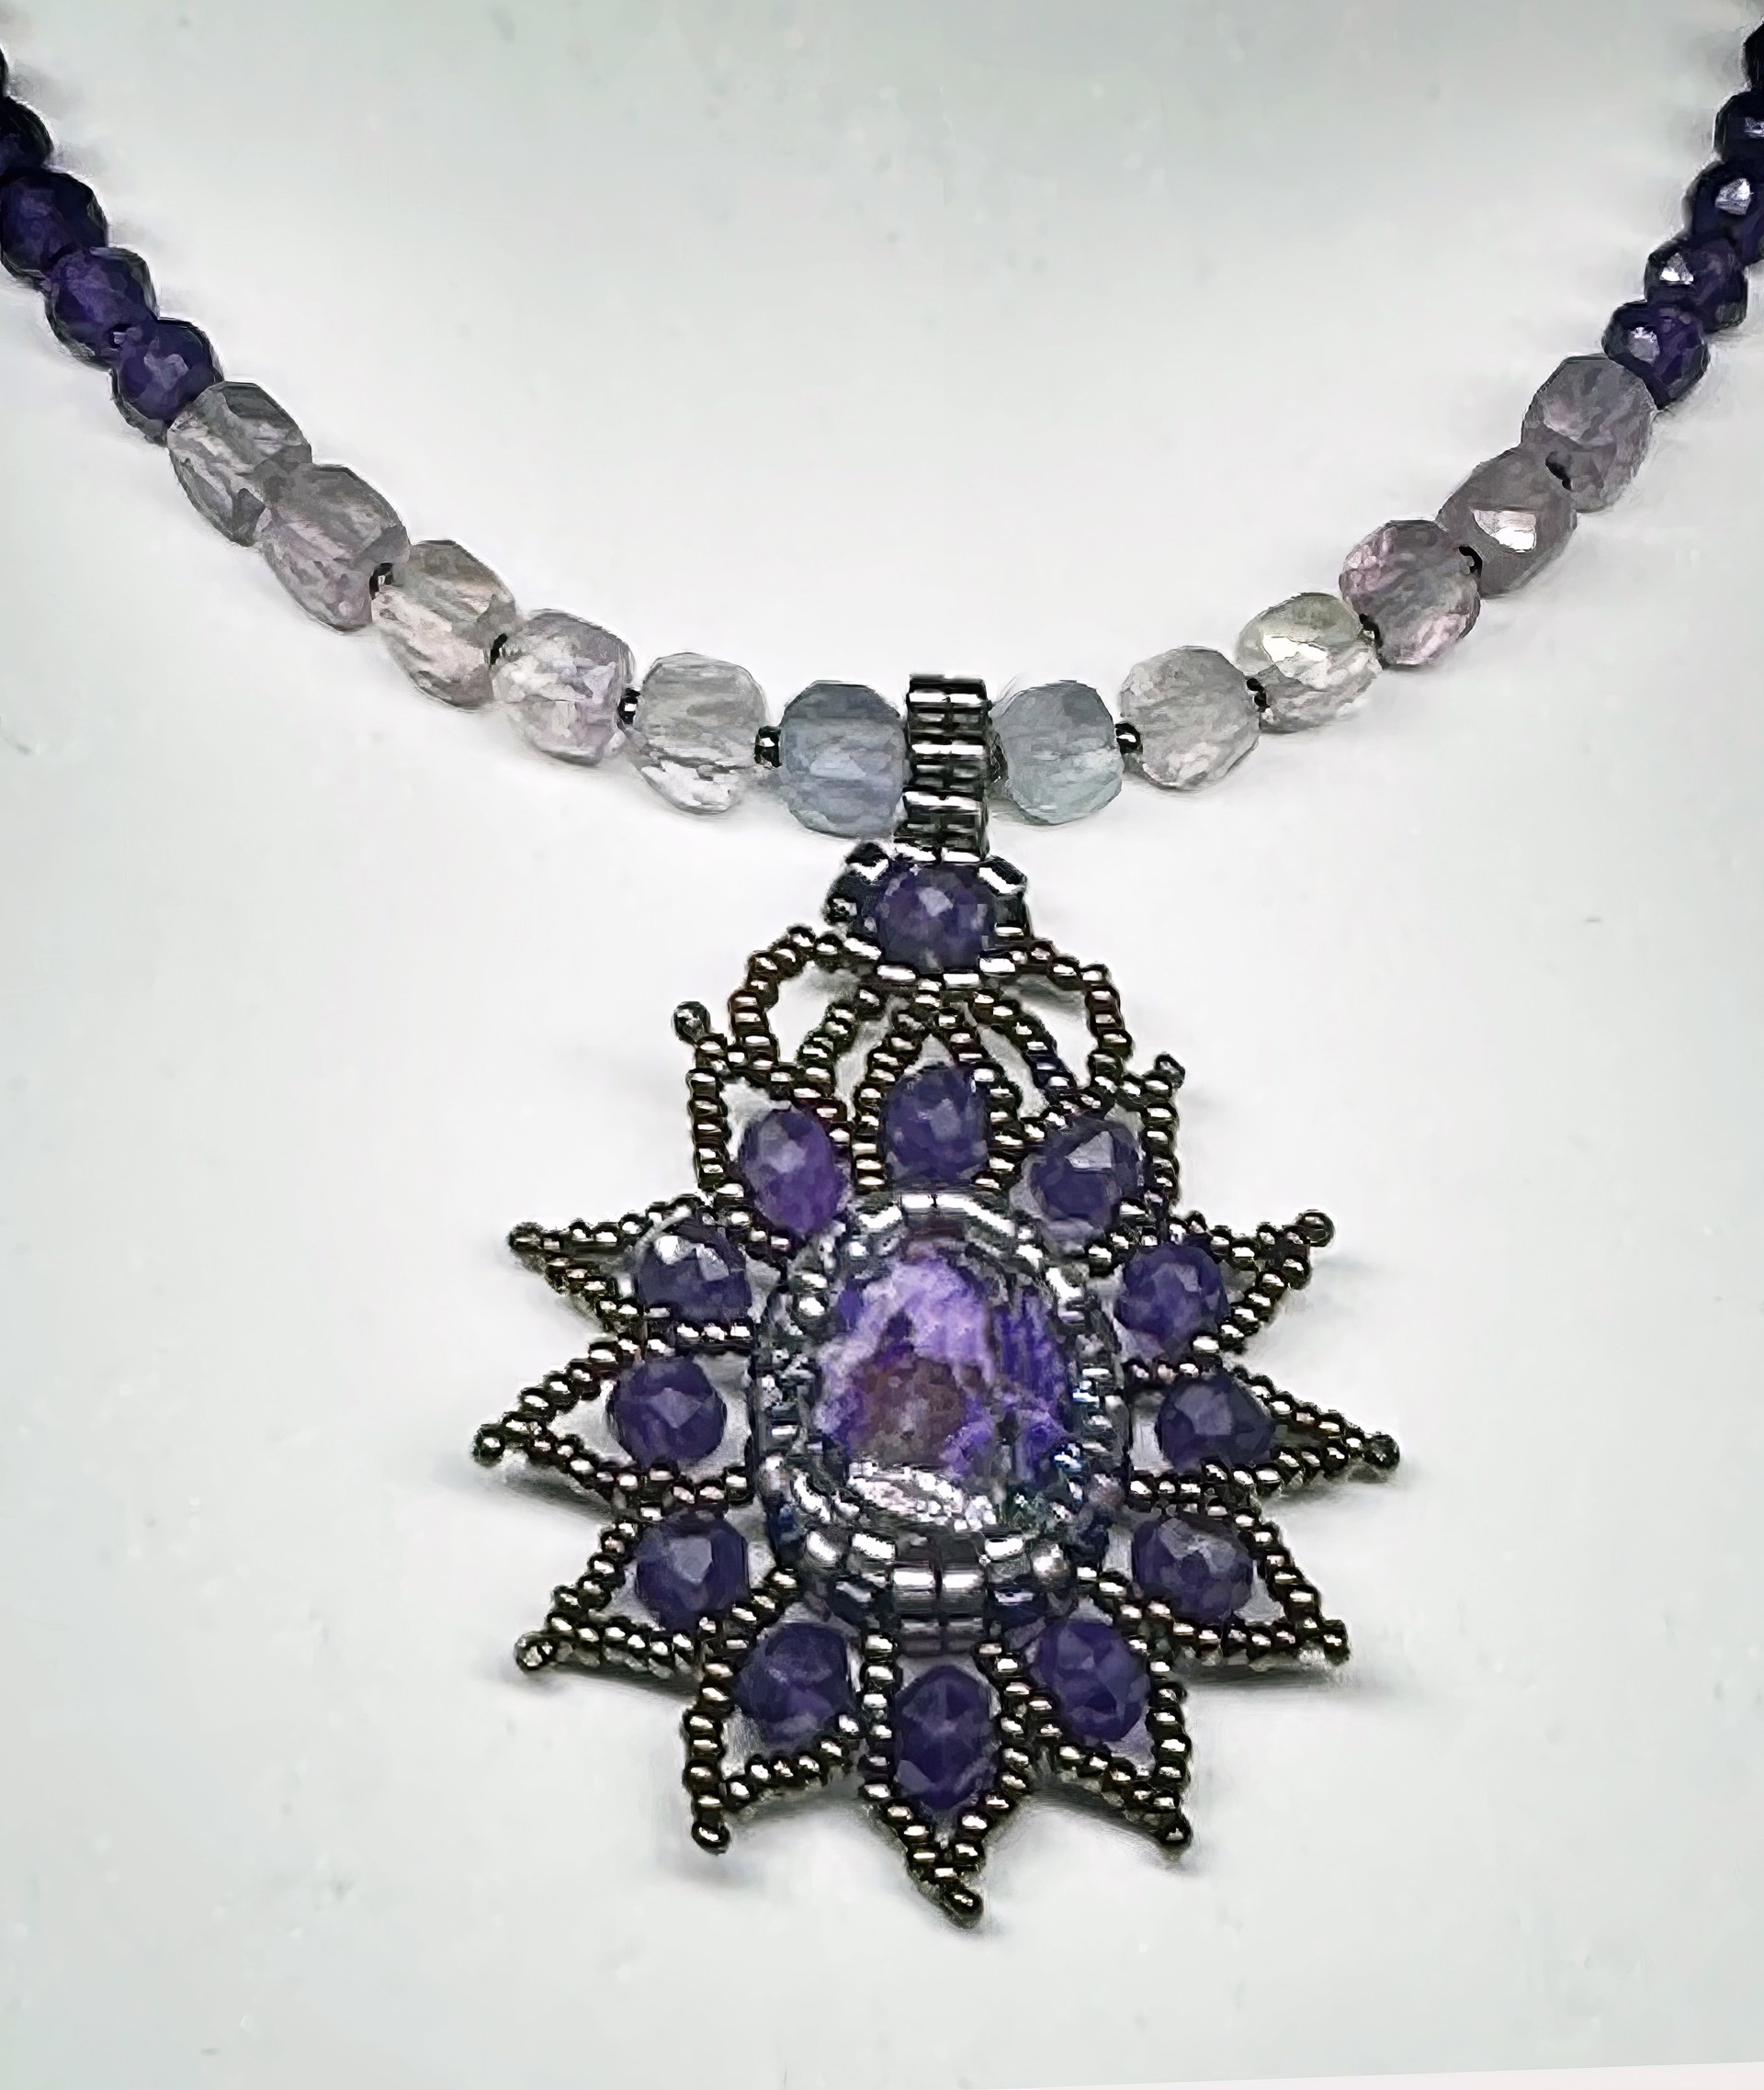 Sugilite Star Necklace with Gemstone Beads by Nina Vidal